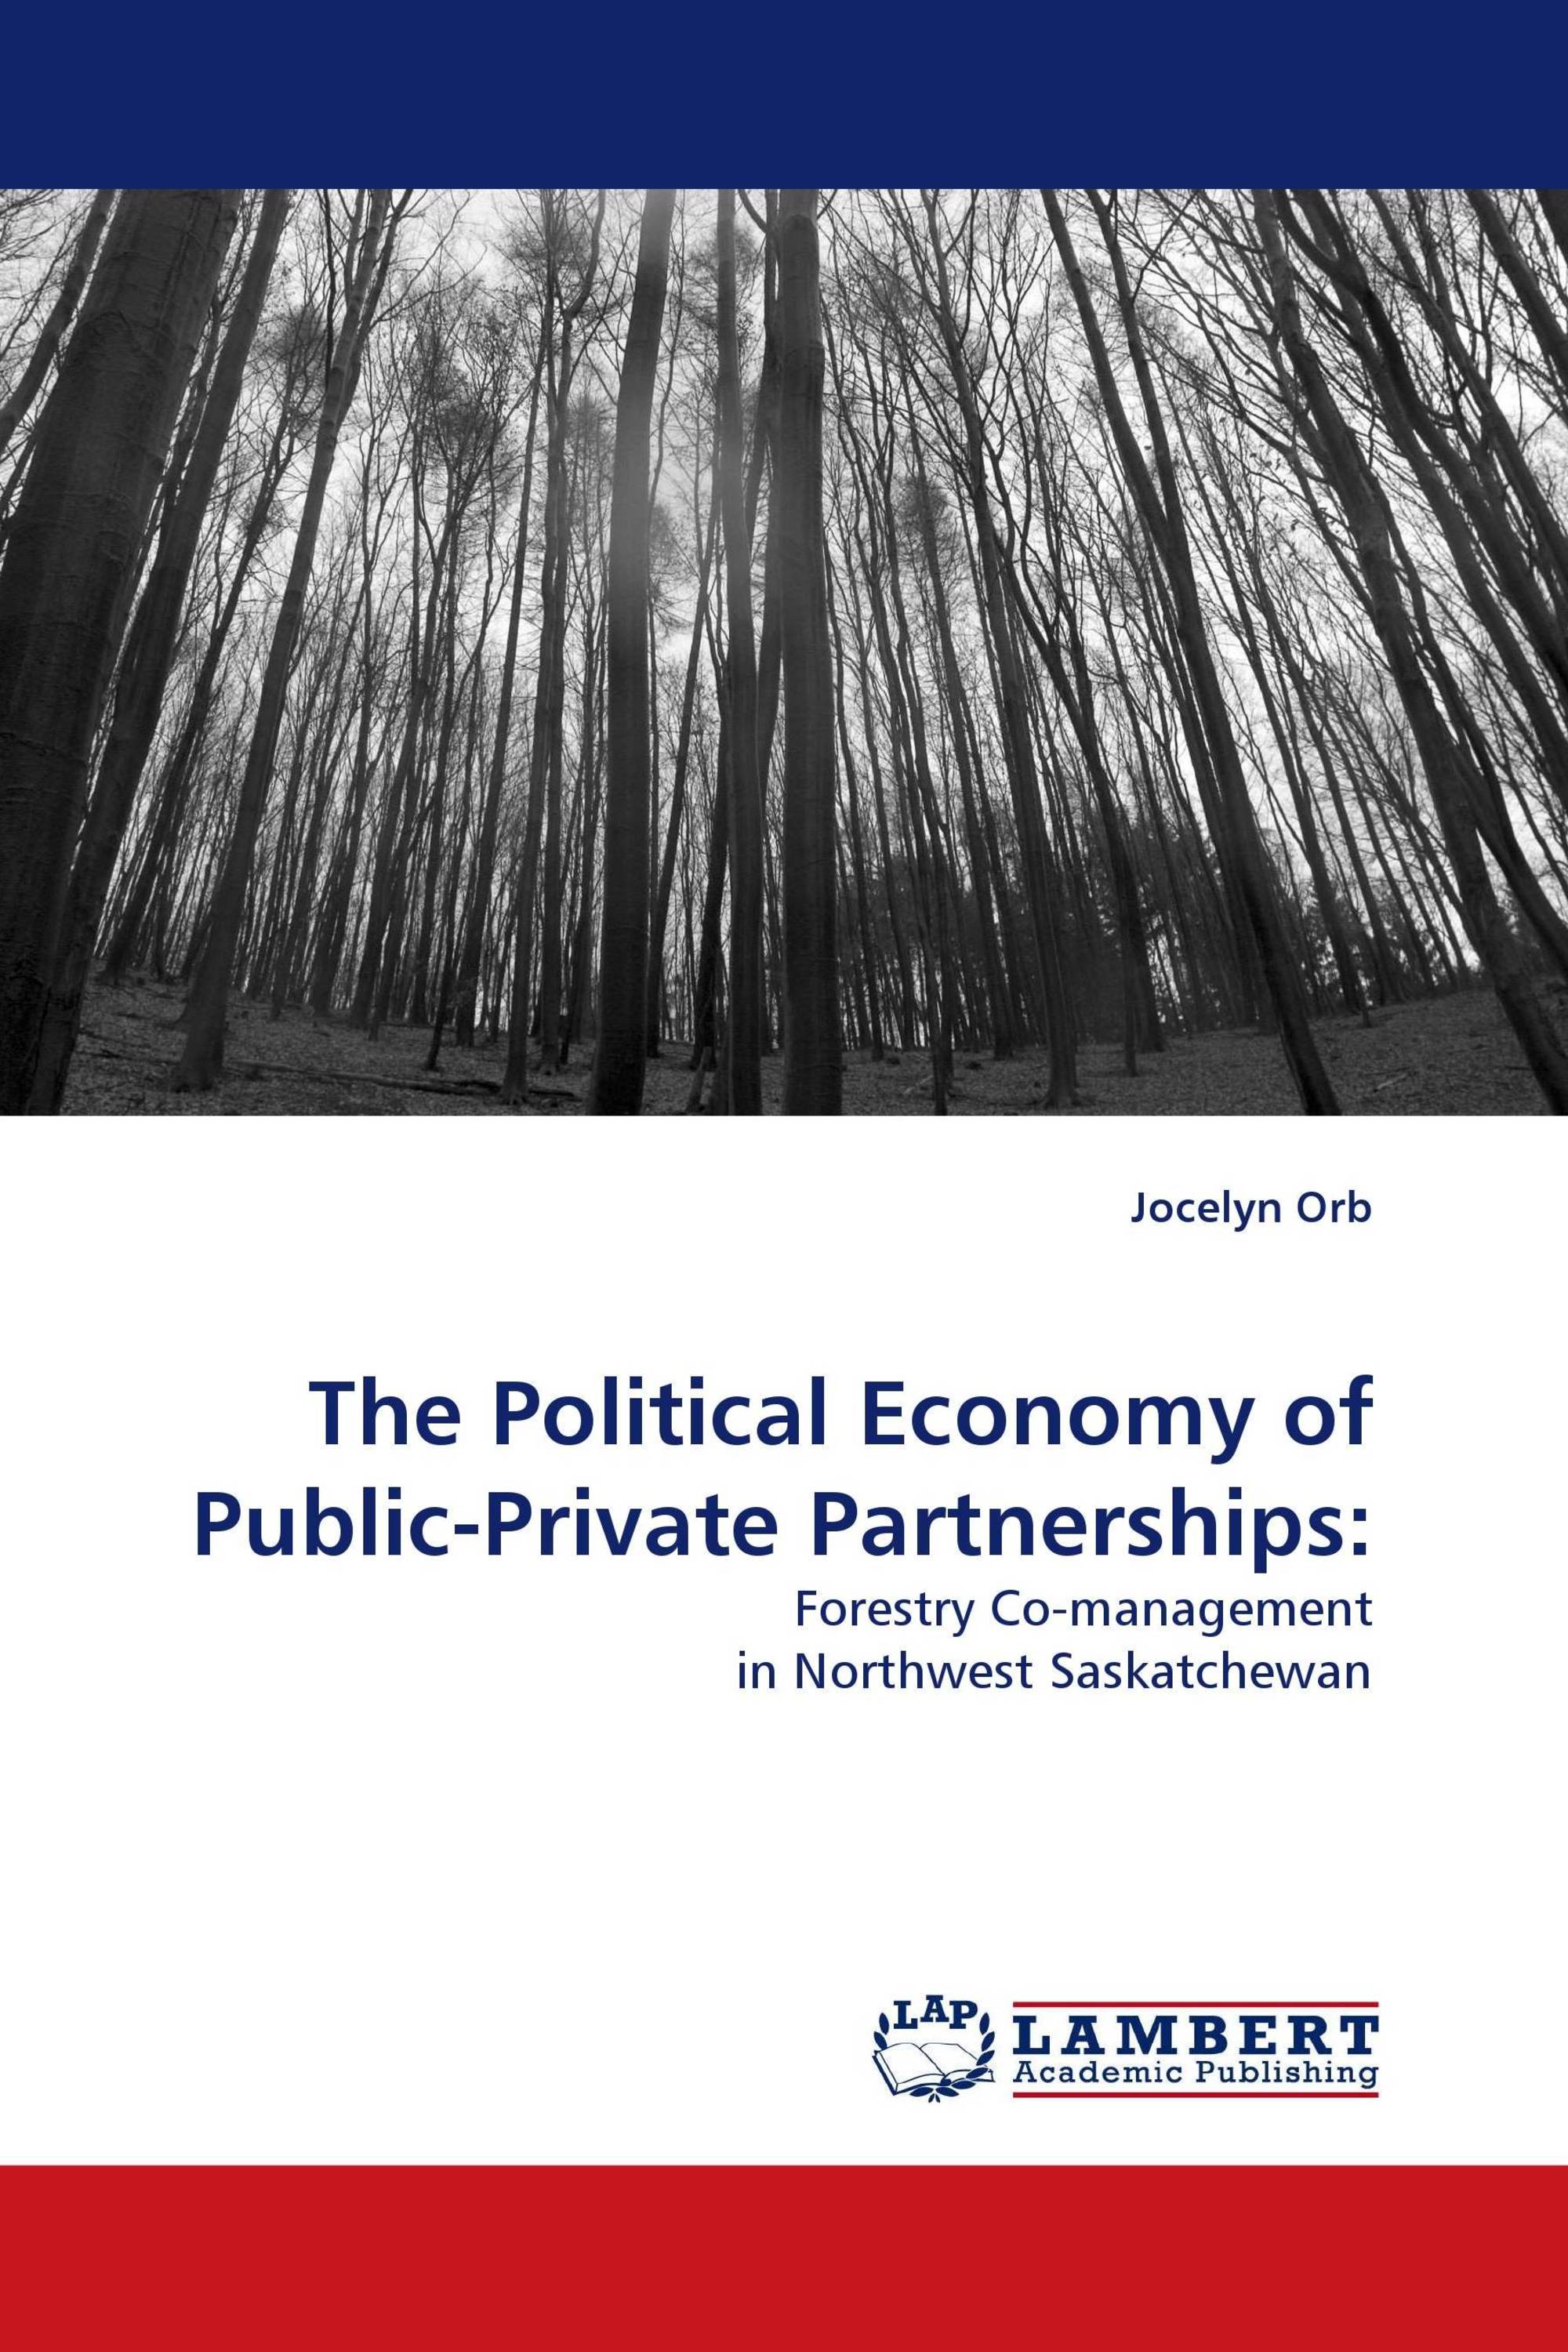 The Political Economy of Public-Private Partnerships: